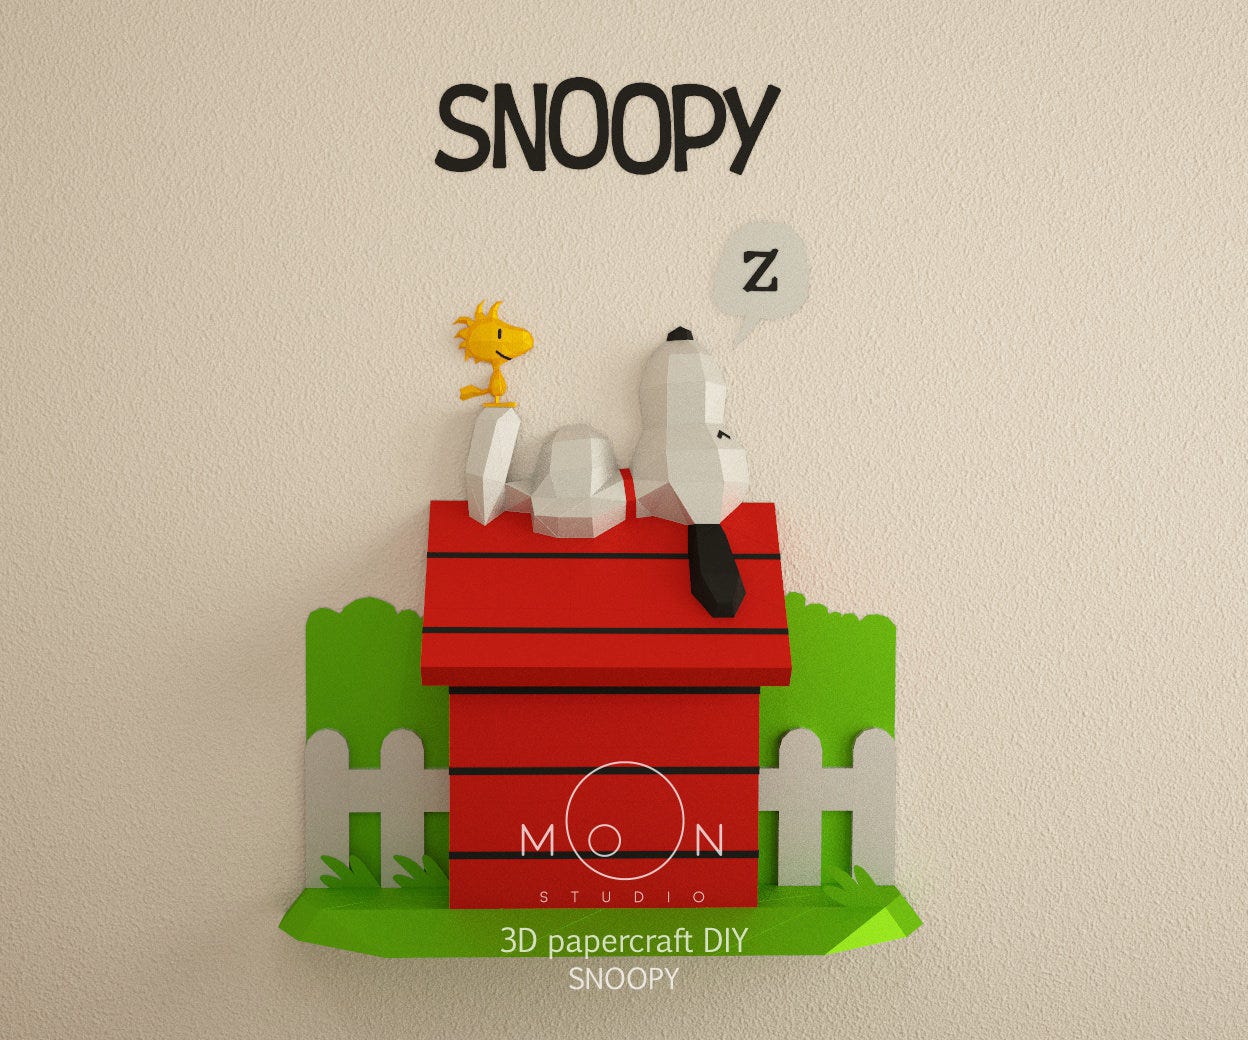 Snoopy, DIY, Papercraft, PDF, Svg, Dxf, Low Poly, 3D model, Craft, Paper, TV, Series, Room Decor, Wall Decor